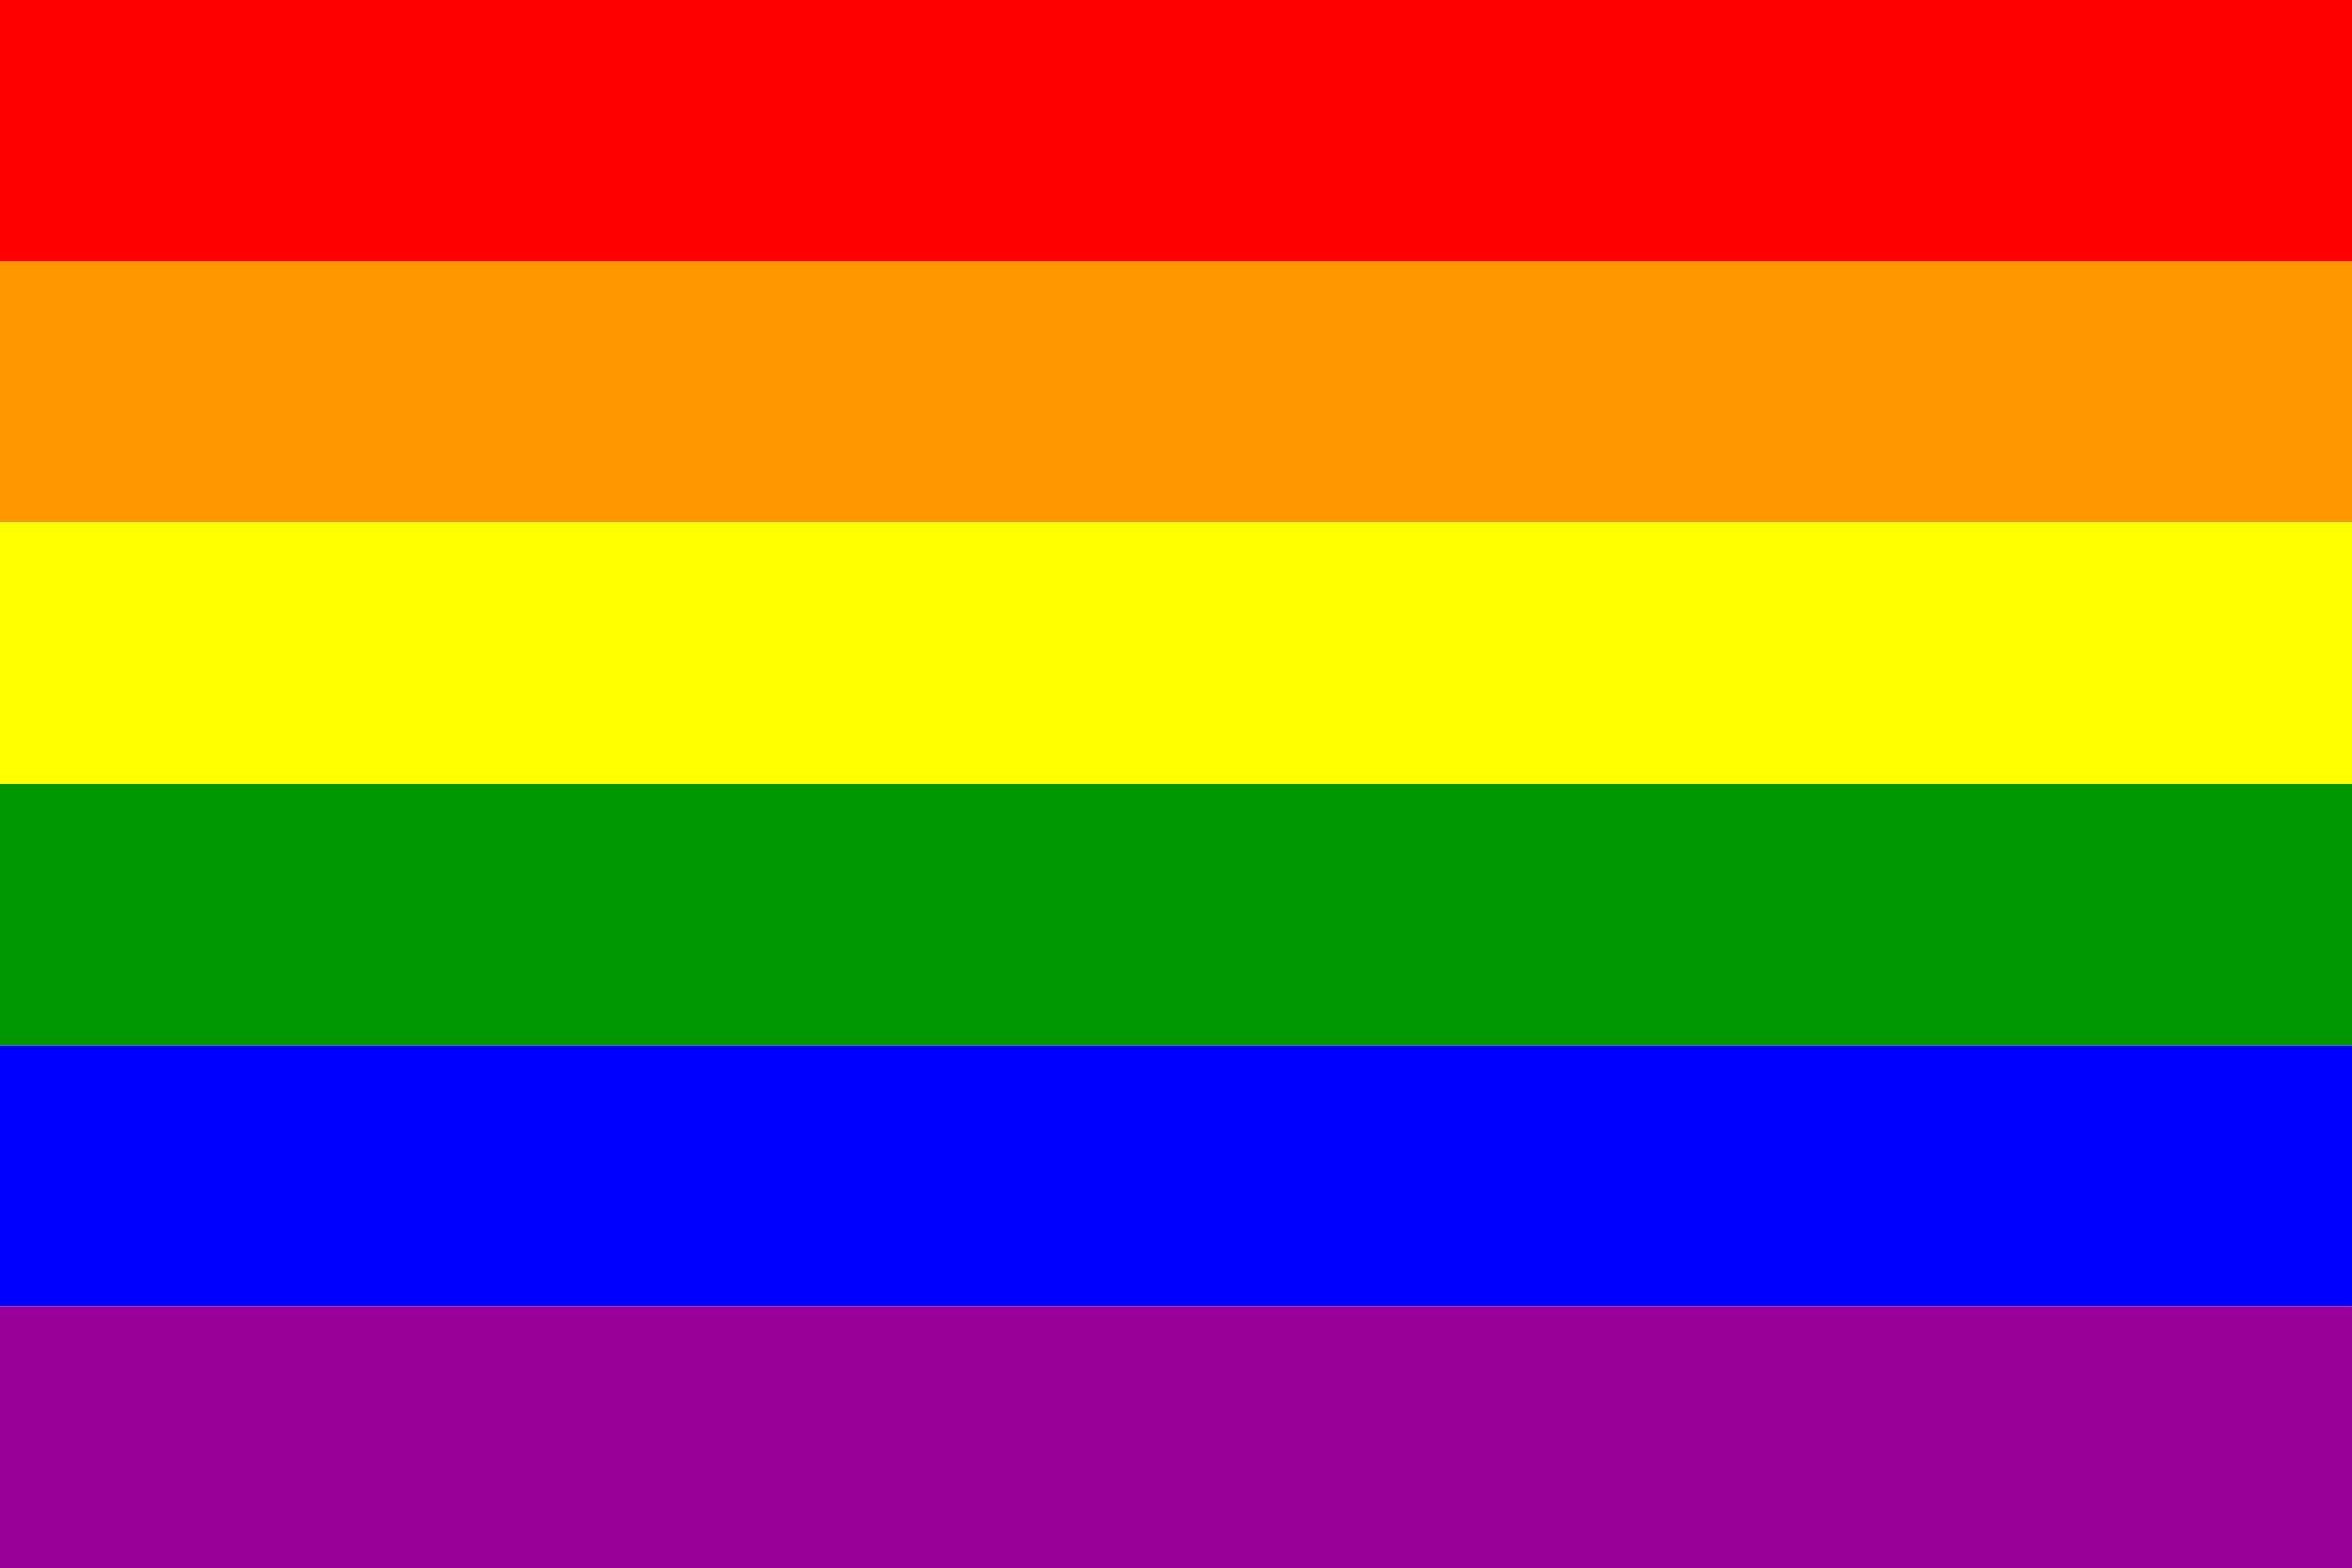 The Gay Pride Rainbow Flag png